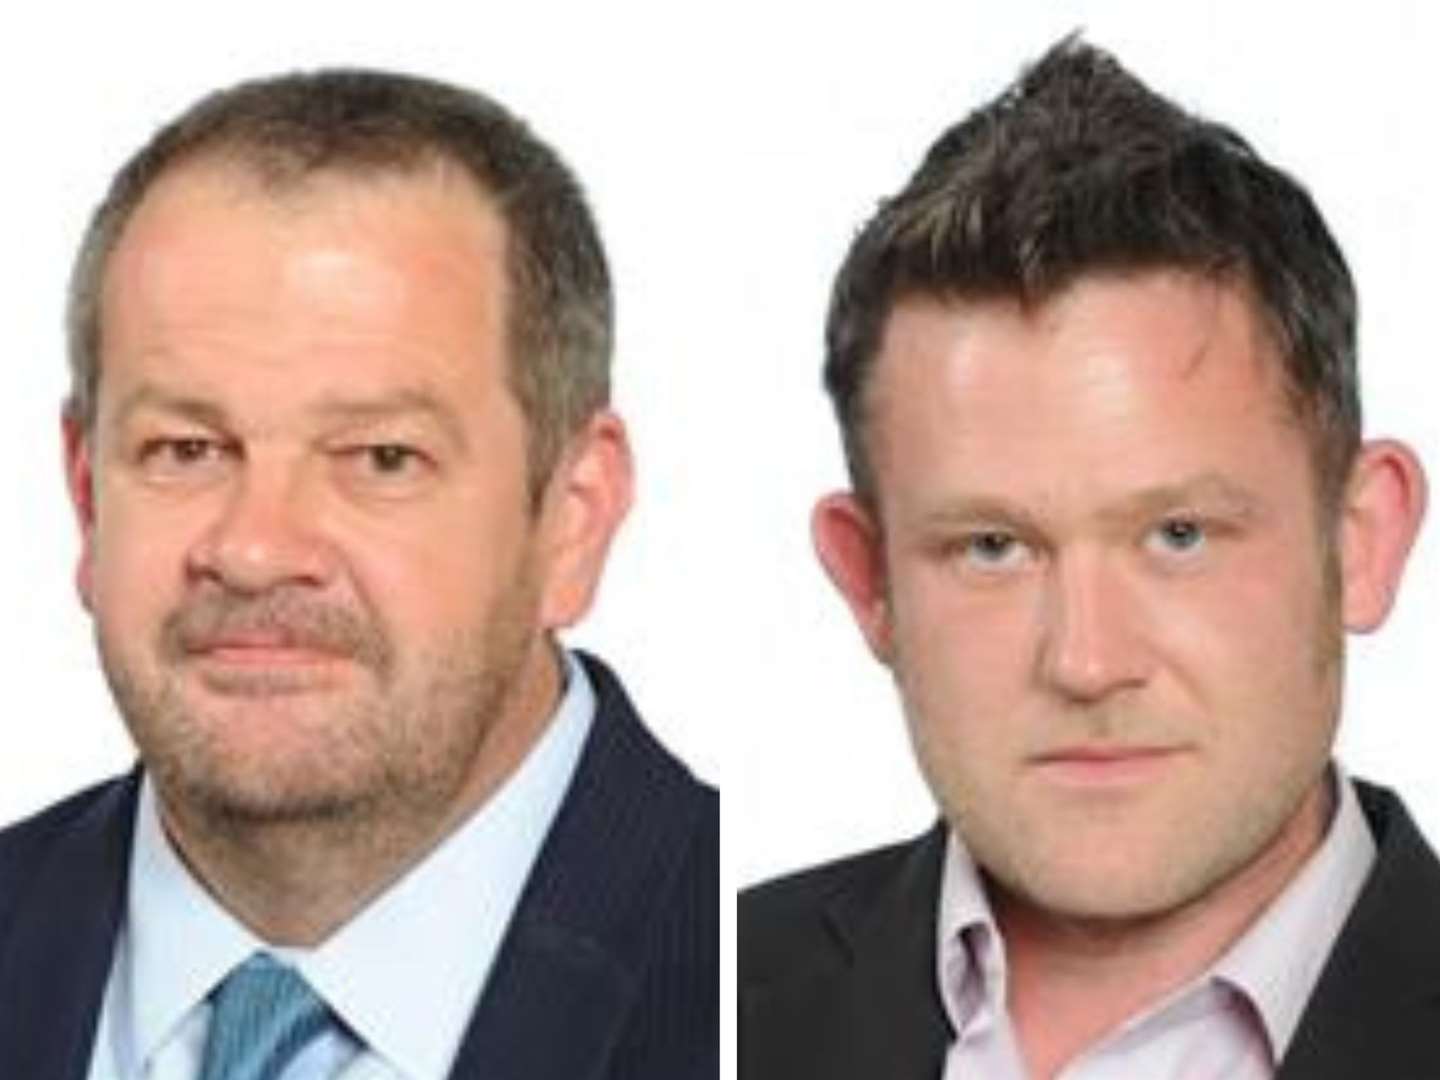 From left: Town ward Cllr Chris Shippam and Richard Wells have been asking for the issue to be resolved. Picture: Dartford Borough Council